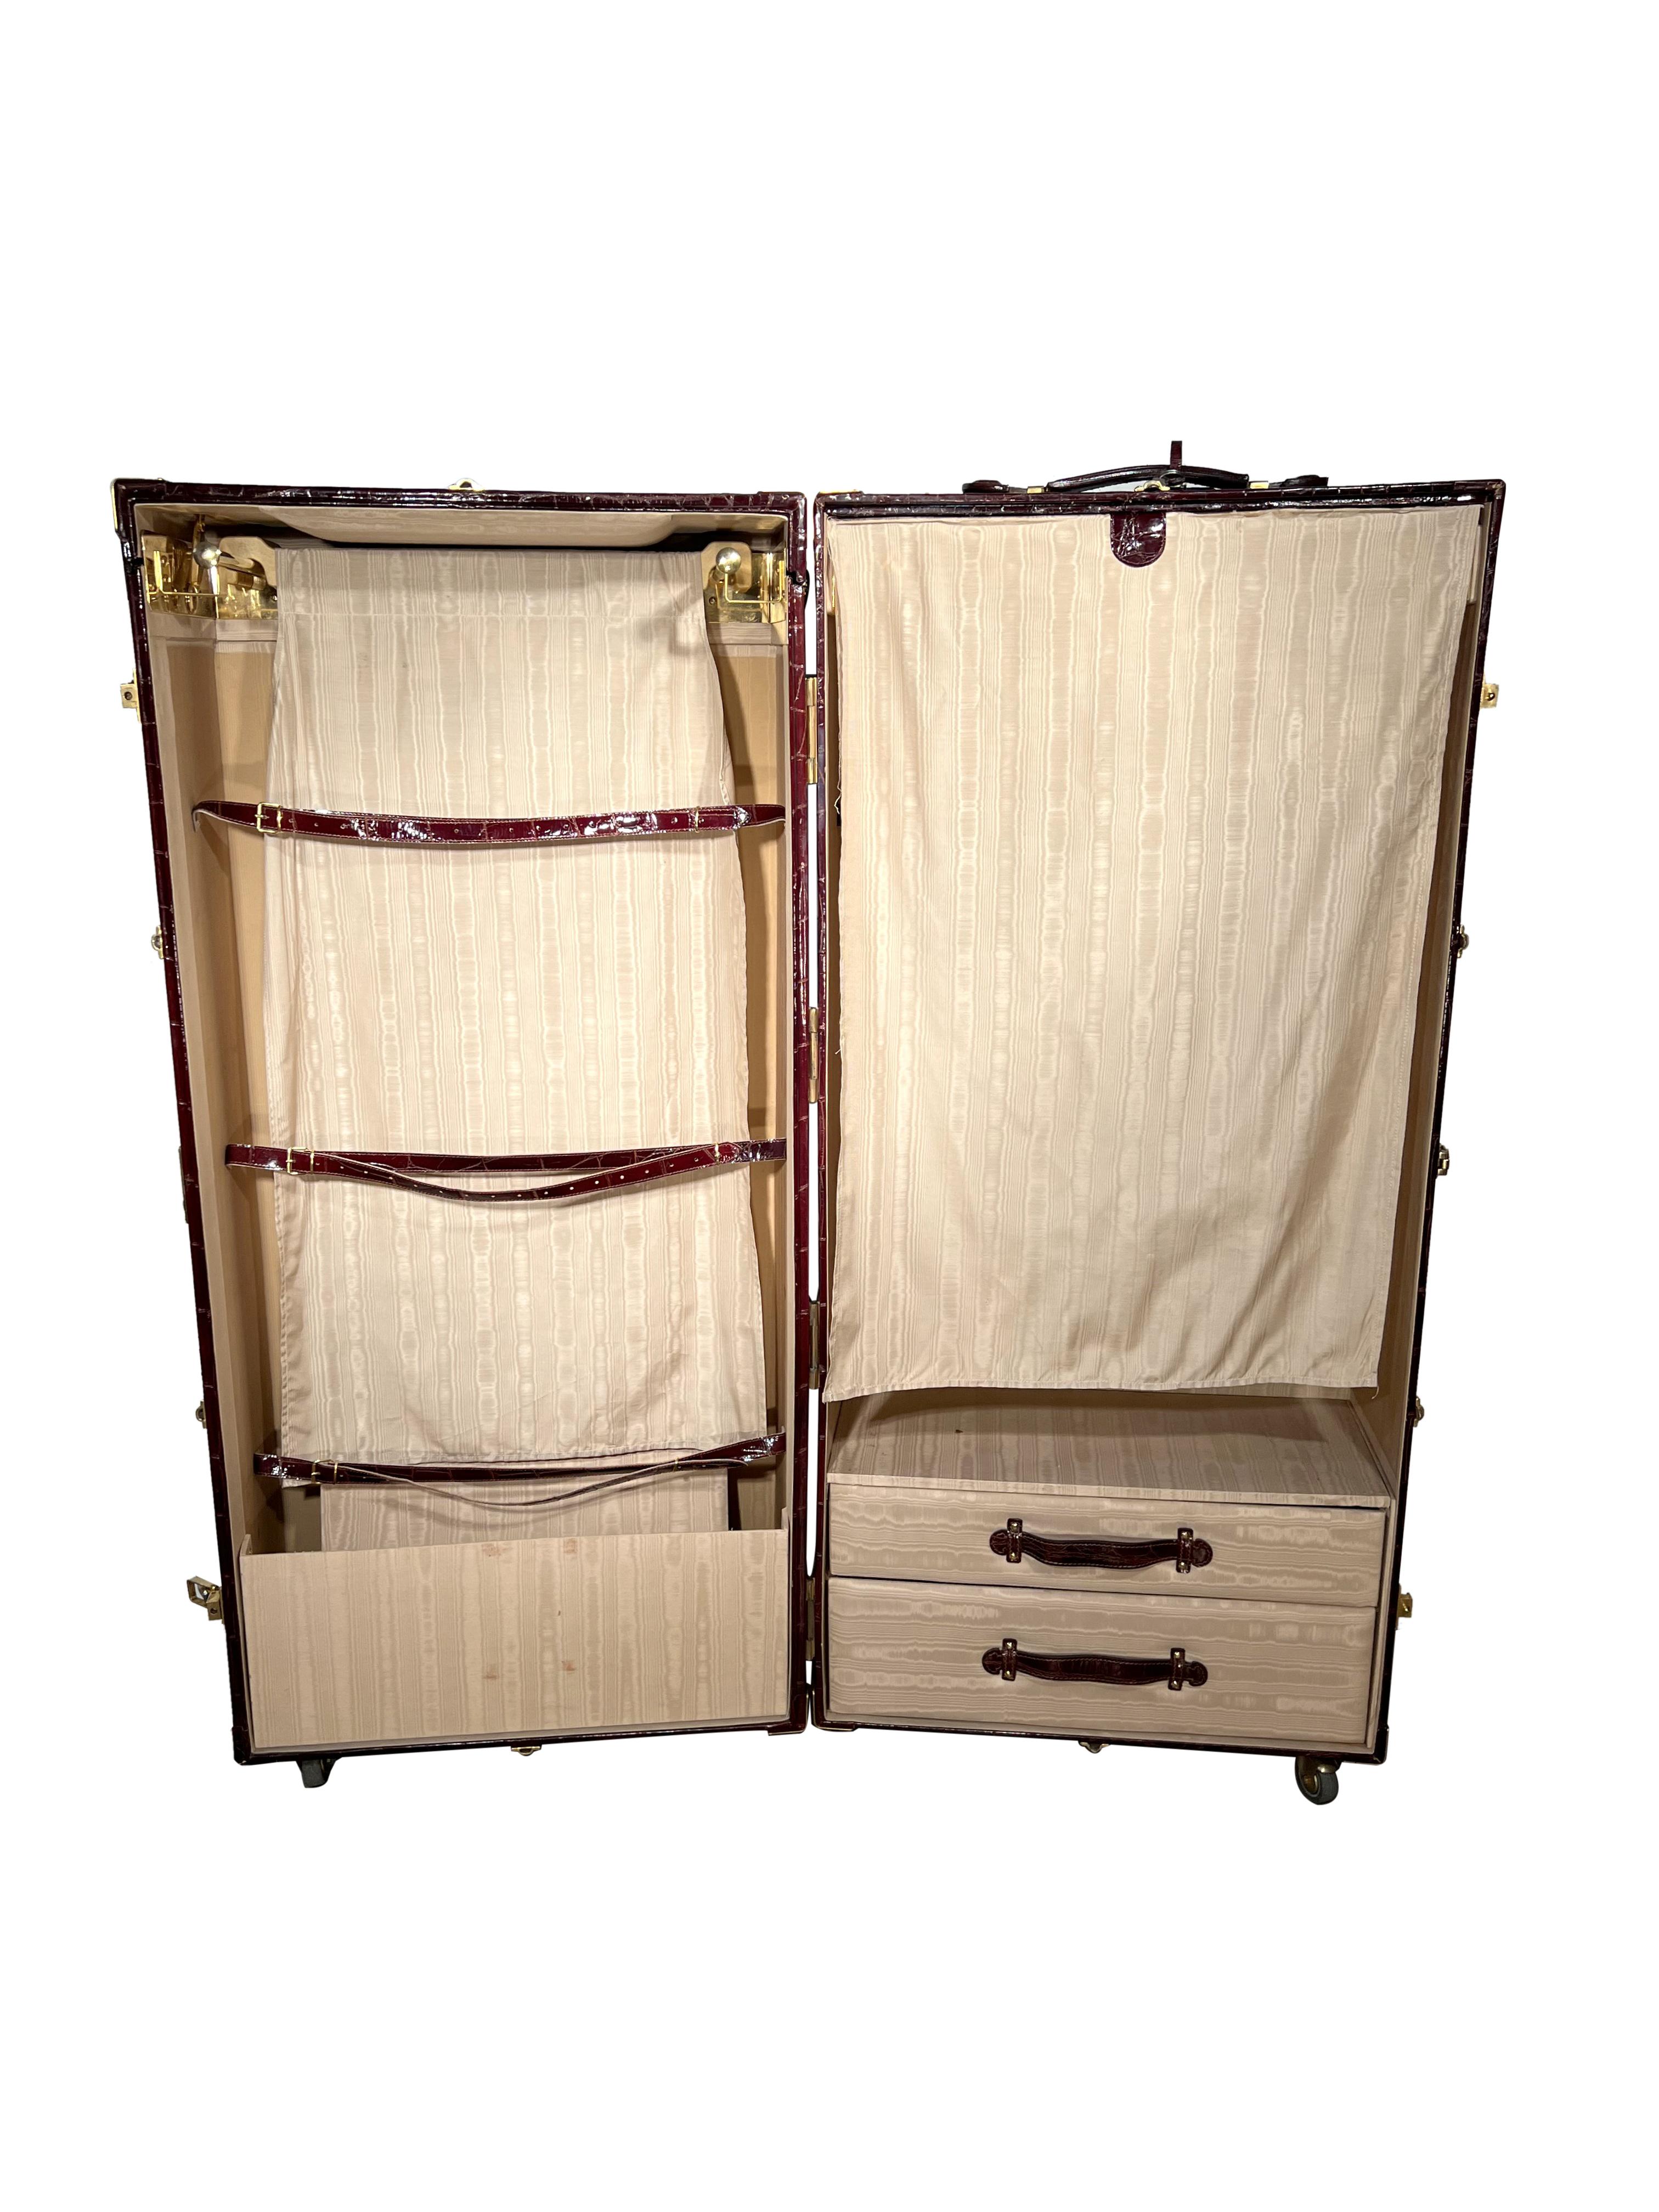 20th Century Large Exotic Embossed Leather Vertical Valet Wardrobe Trunk For Sale 10